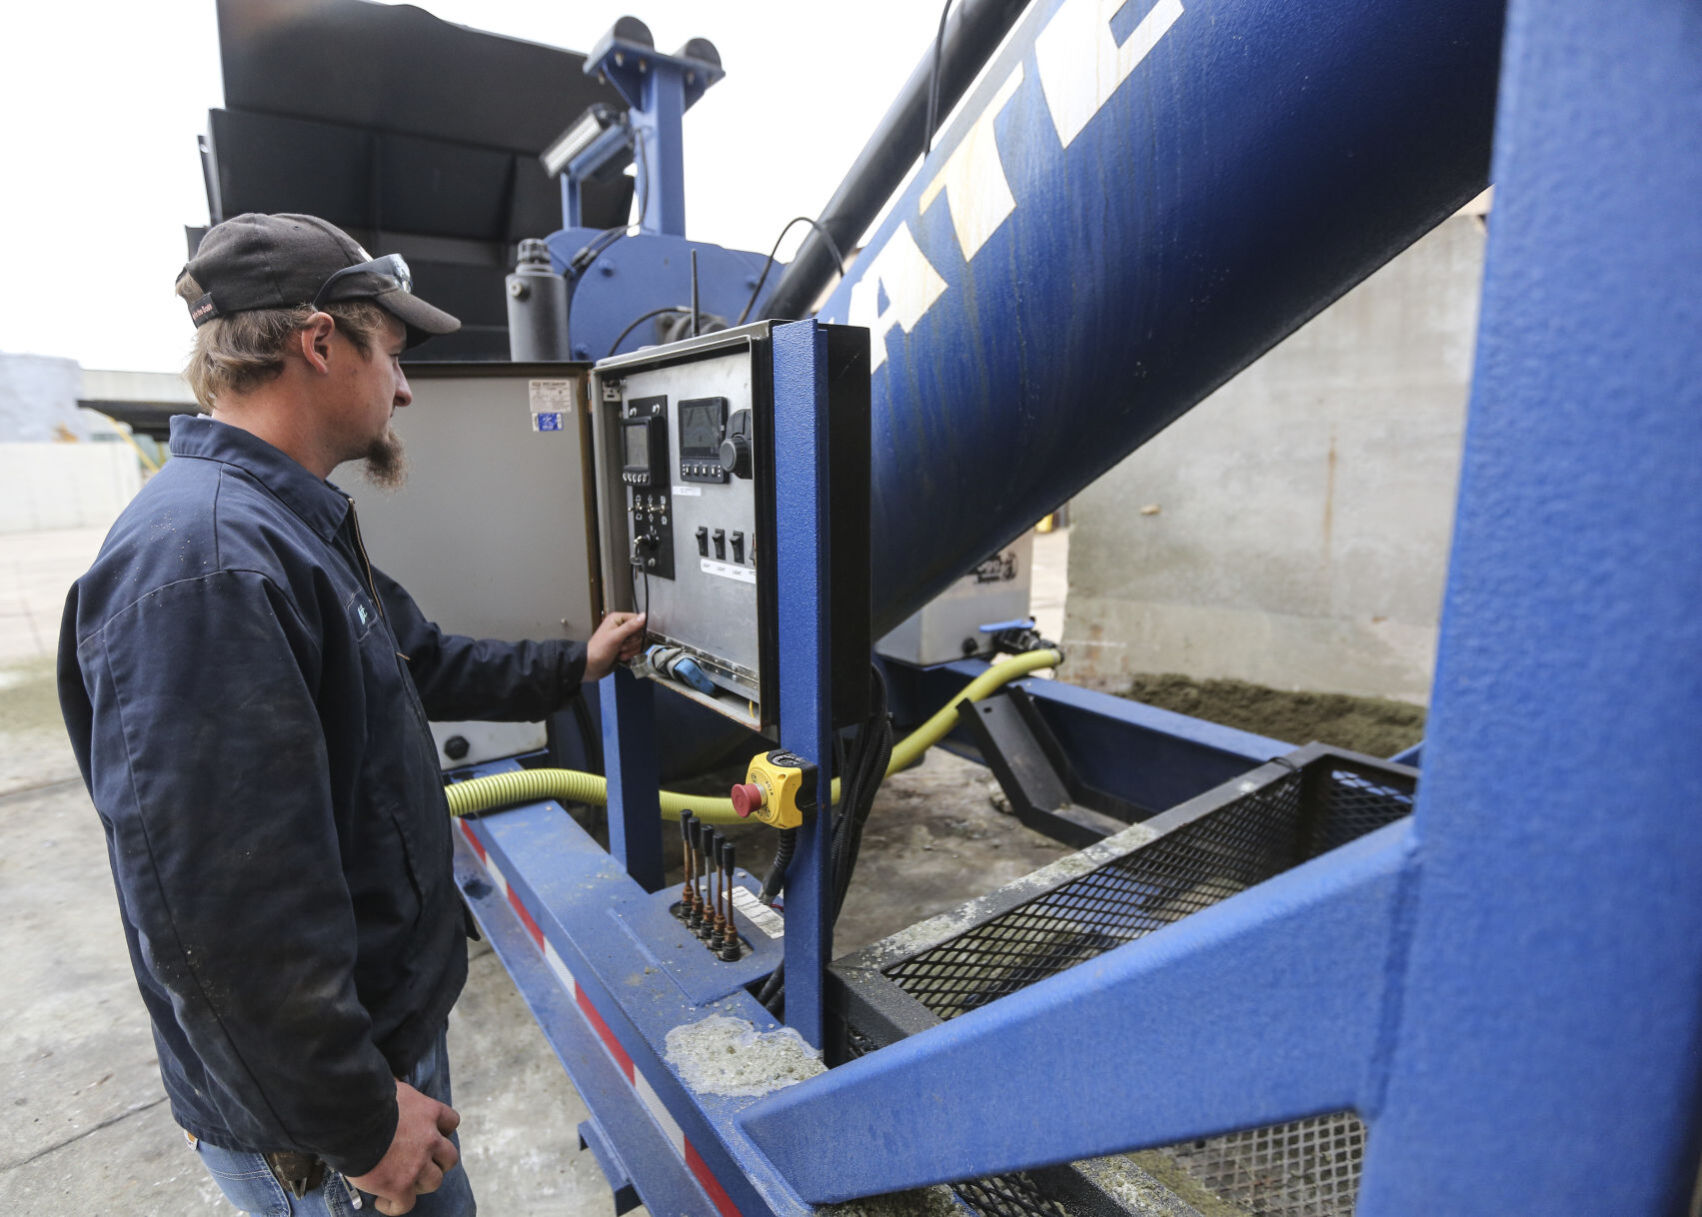 Employee Matt Flynn works with a new piece of equipment that applies liquid treatment to salt at Skyline Salt Solutions in Dubuque on Friday.     PHOTO CREDIT: Dave Kettering